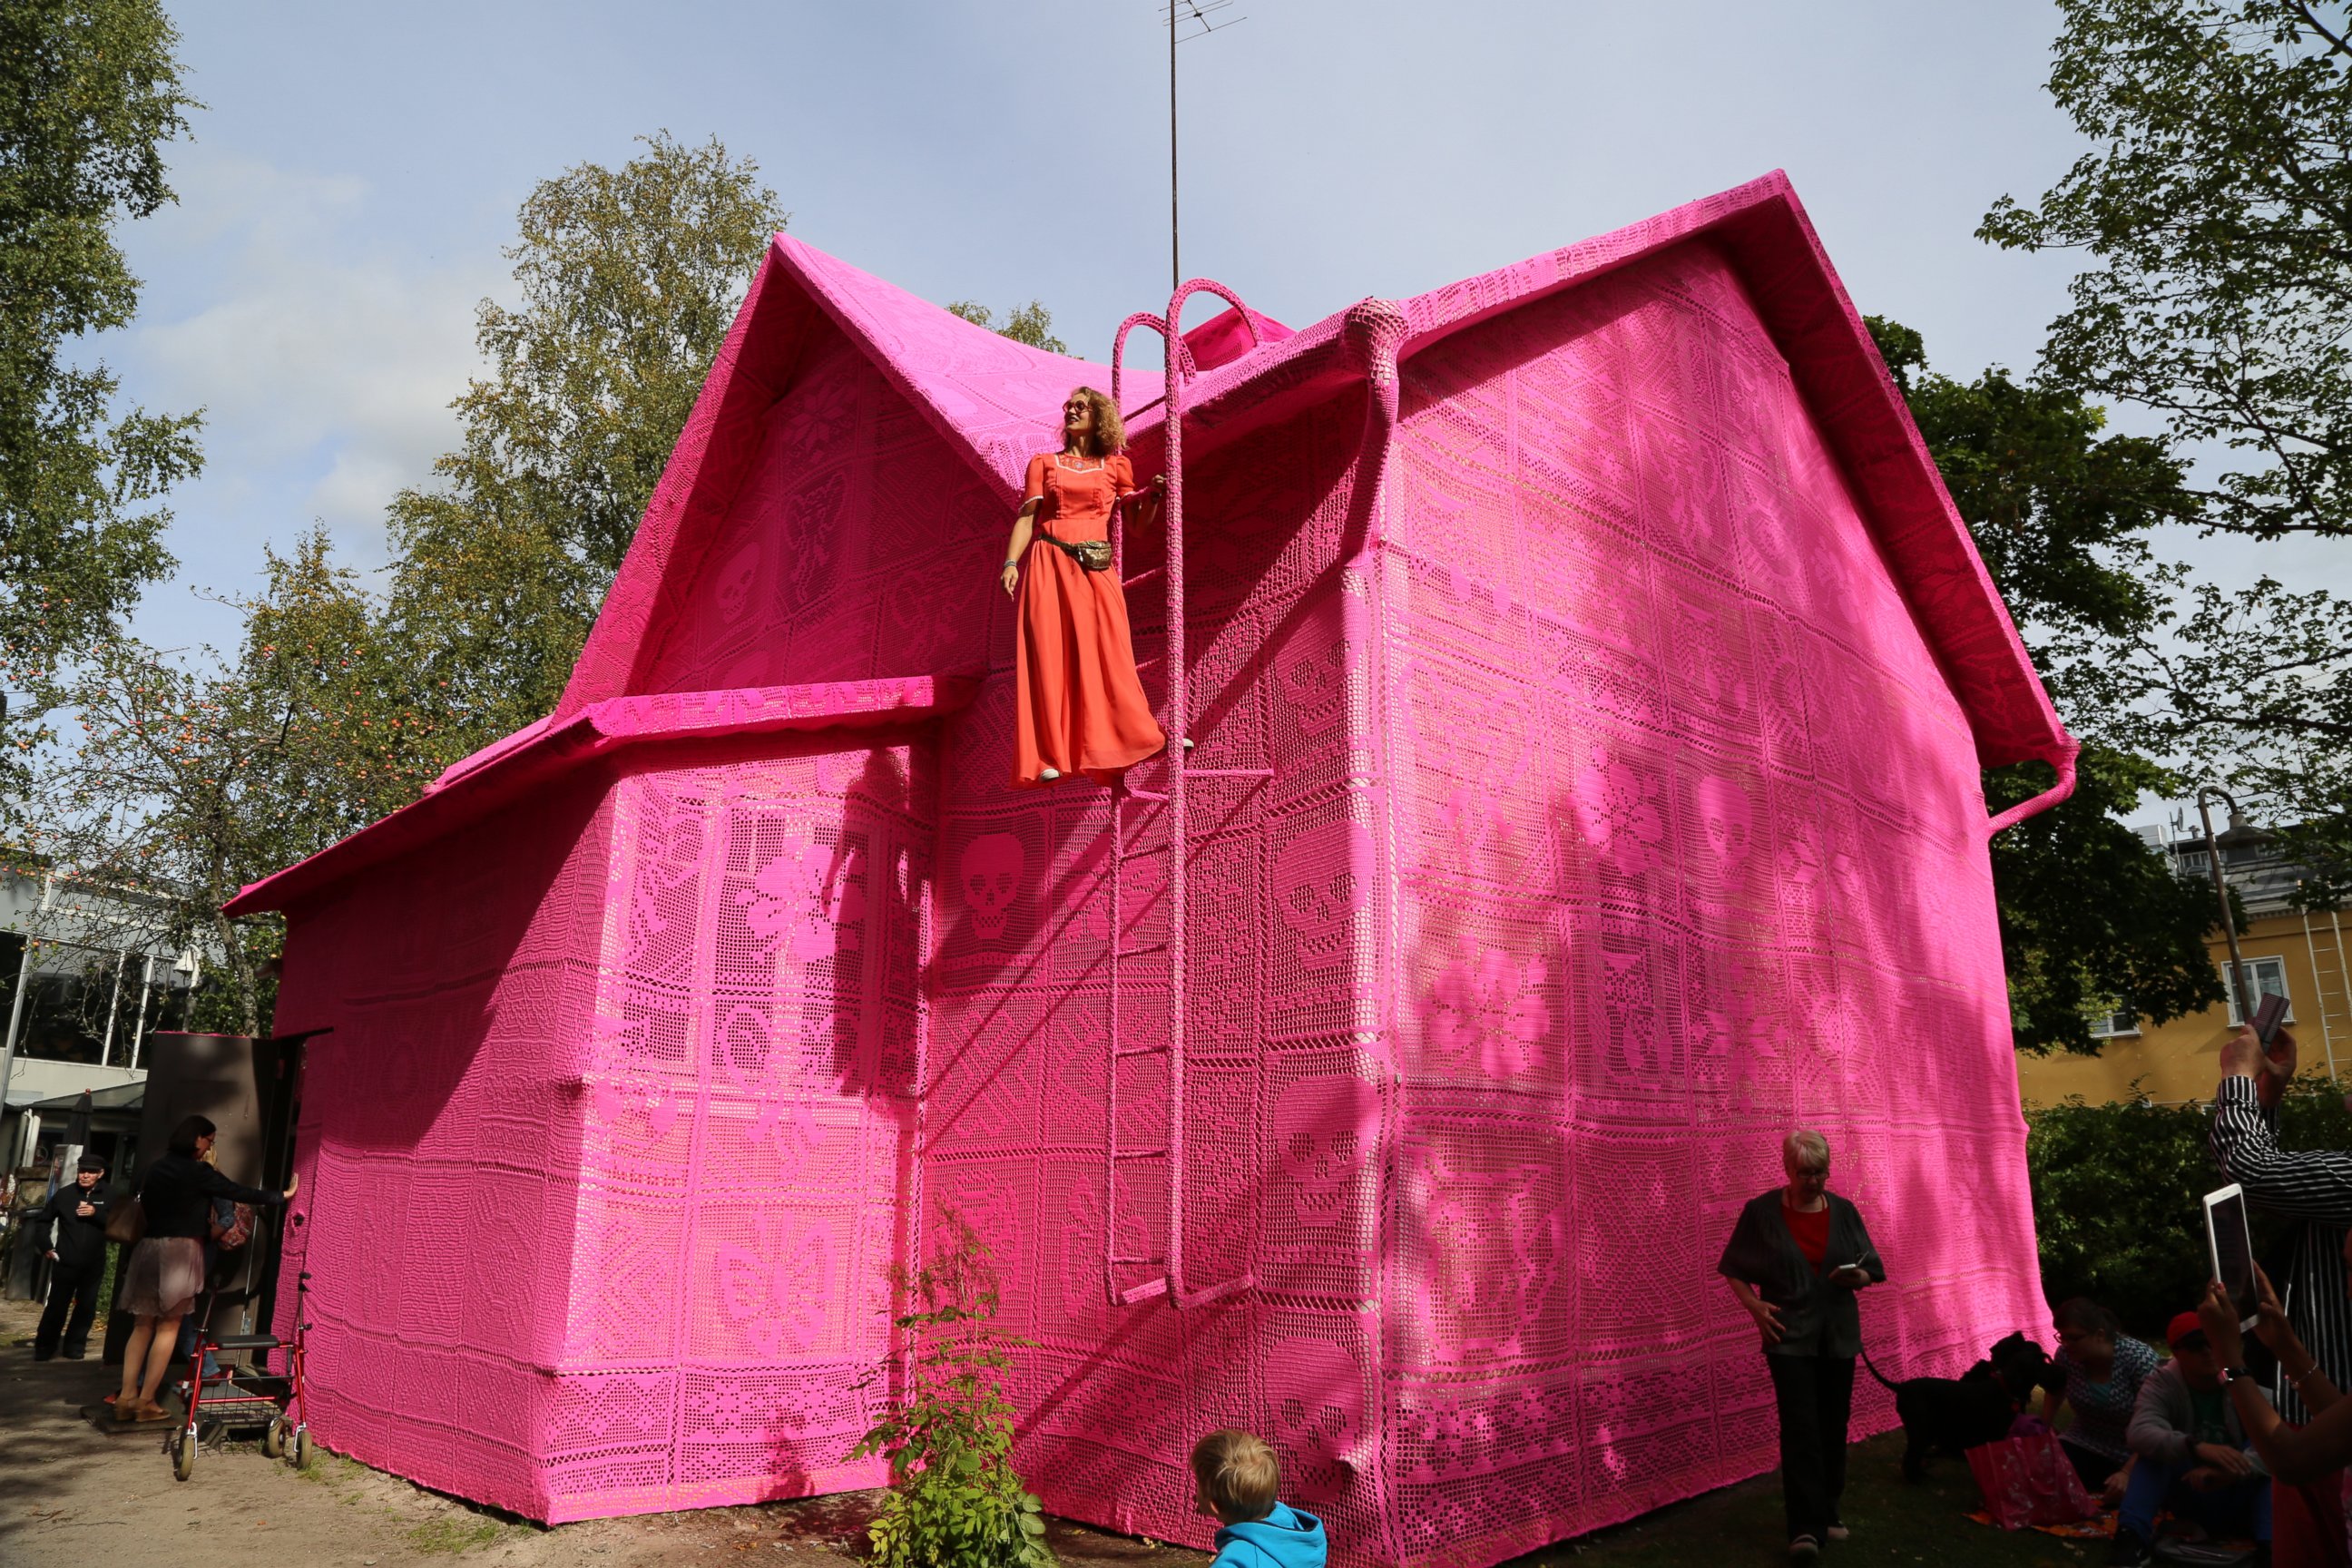 PHOTO: Olek on top of her pink crocheted house in Kerava, Finland.